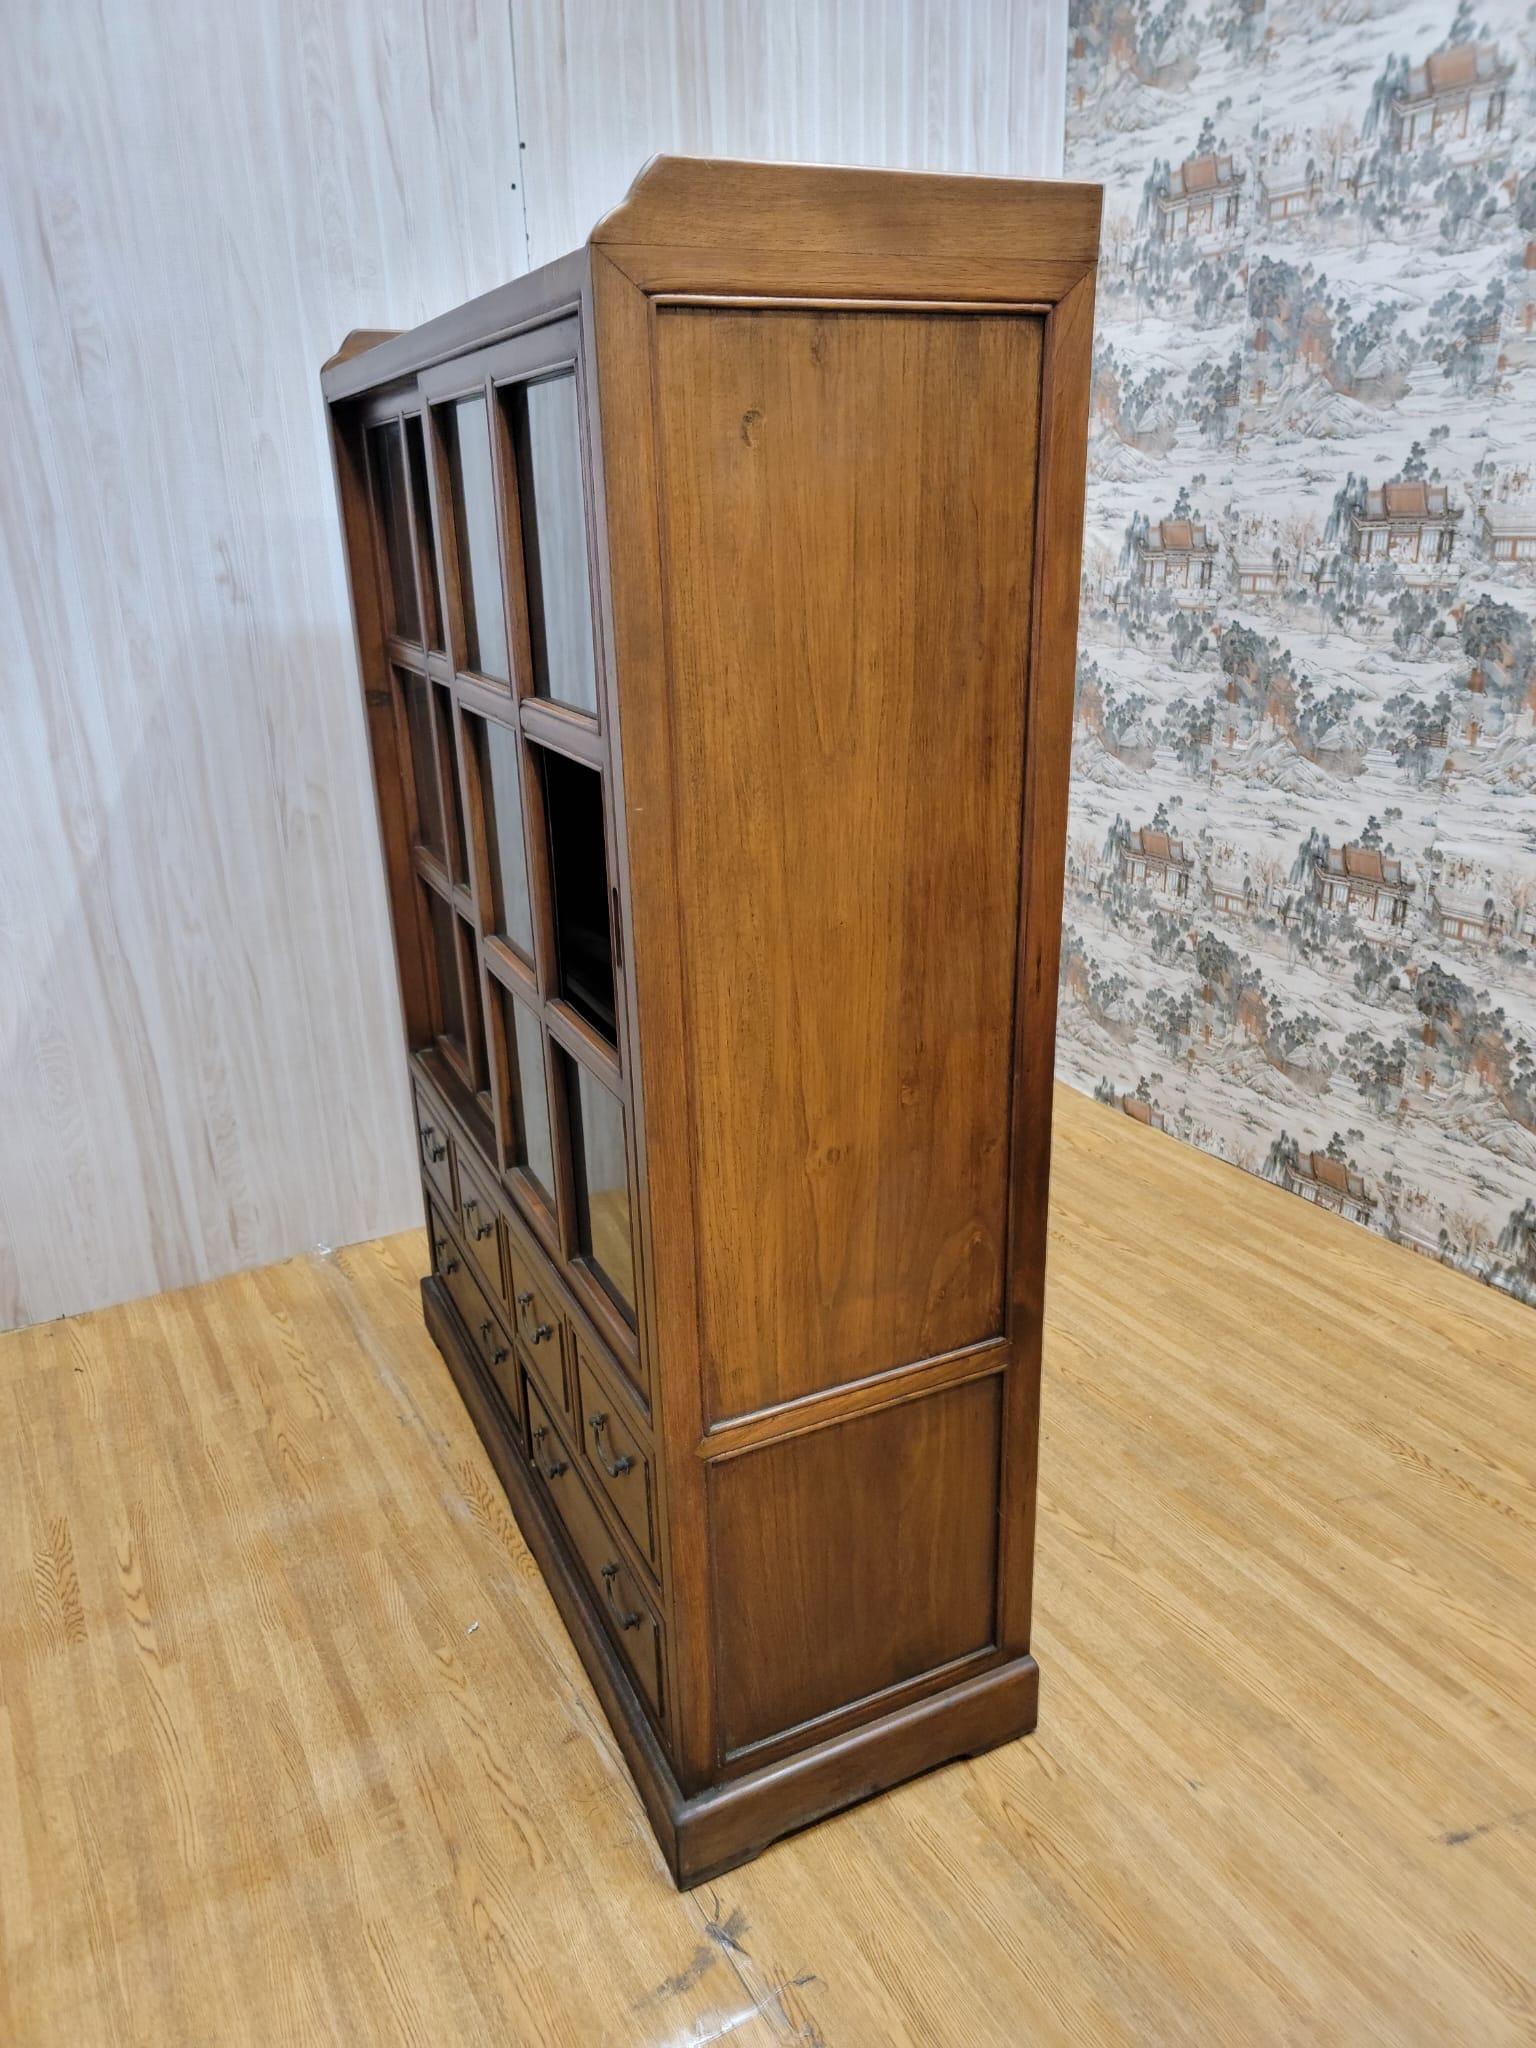 Vintage Chinese Elm display cabinets / bookcases 

These elm sliding glass cabinets that have a brown lacquer finish has 6 drawers and 3 shelves. Can be used as display cabinets or great bookcases. 

Circa: 1994

Dimensions:

W: 48